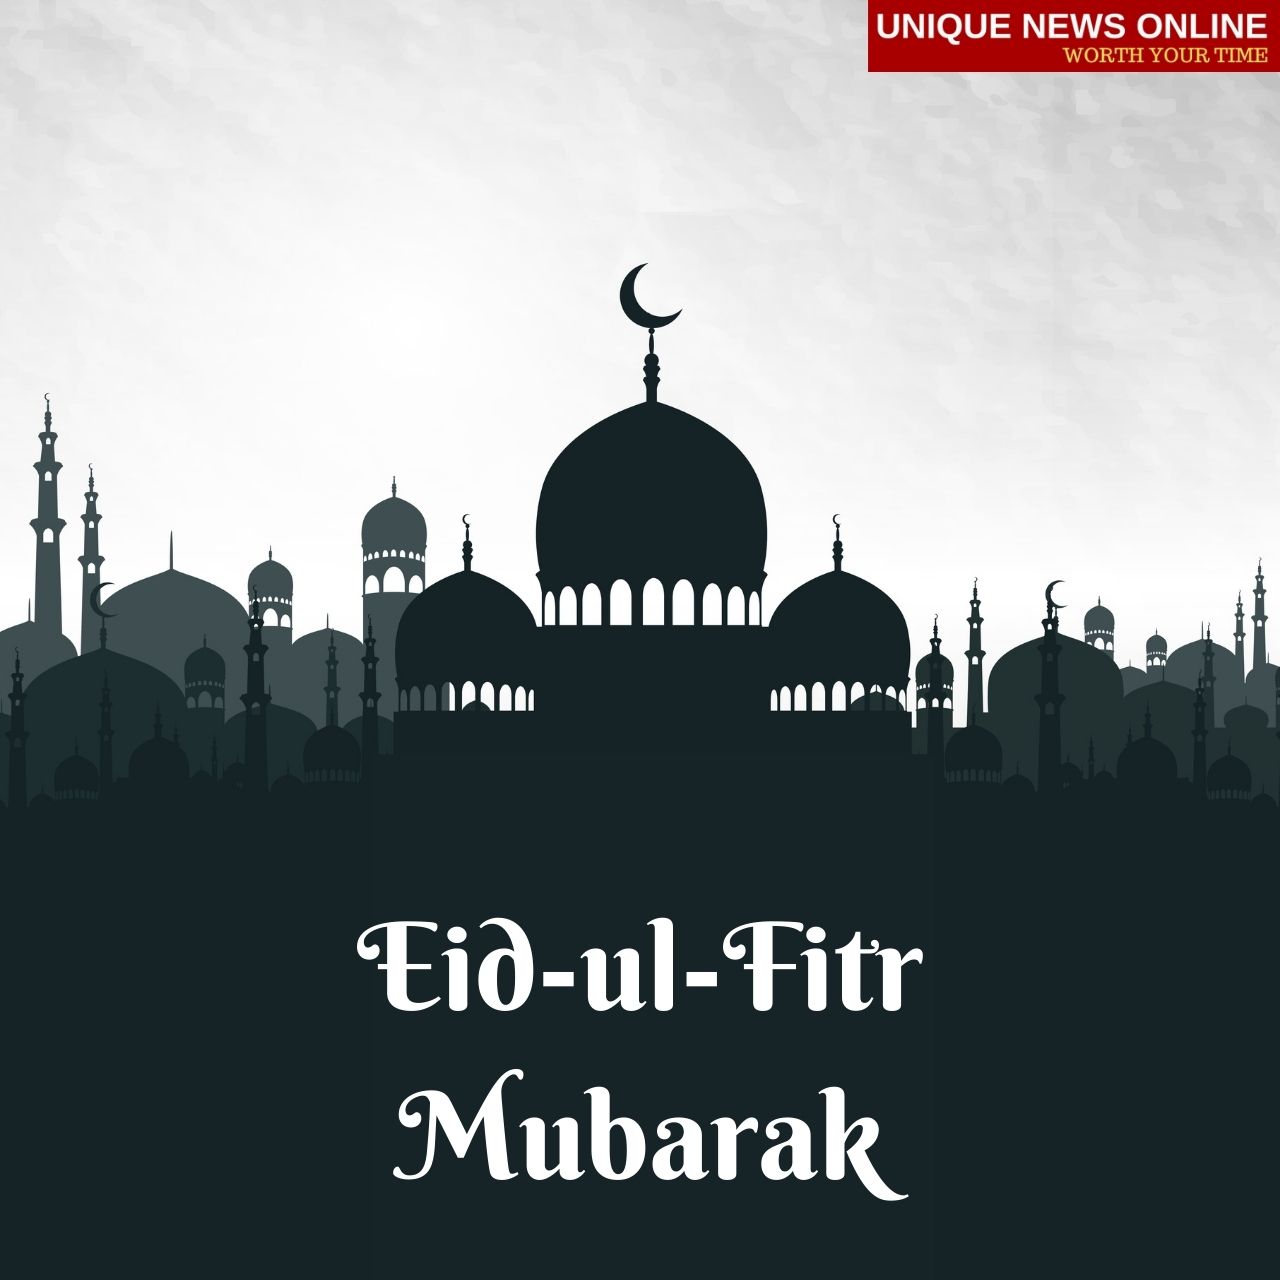 Eid-ul-Fitr Mubarak 2021 Wishes, Greetings, Shayari, Images, GIF, Quotes, Messages, DP, and Greetings Card to greet your Loved Ones on this Eid al-Fitr